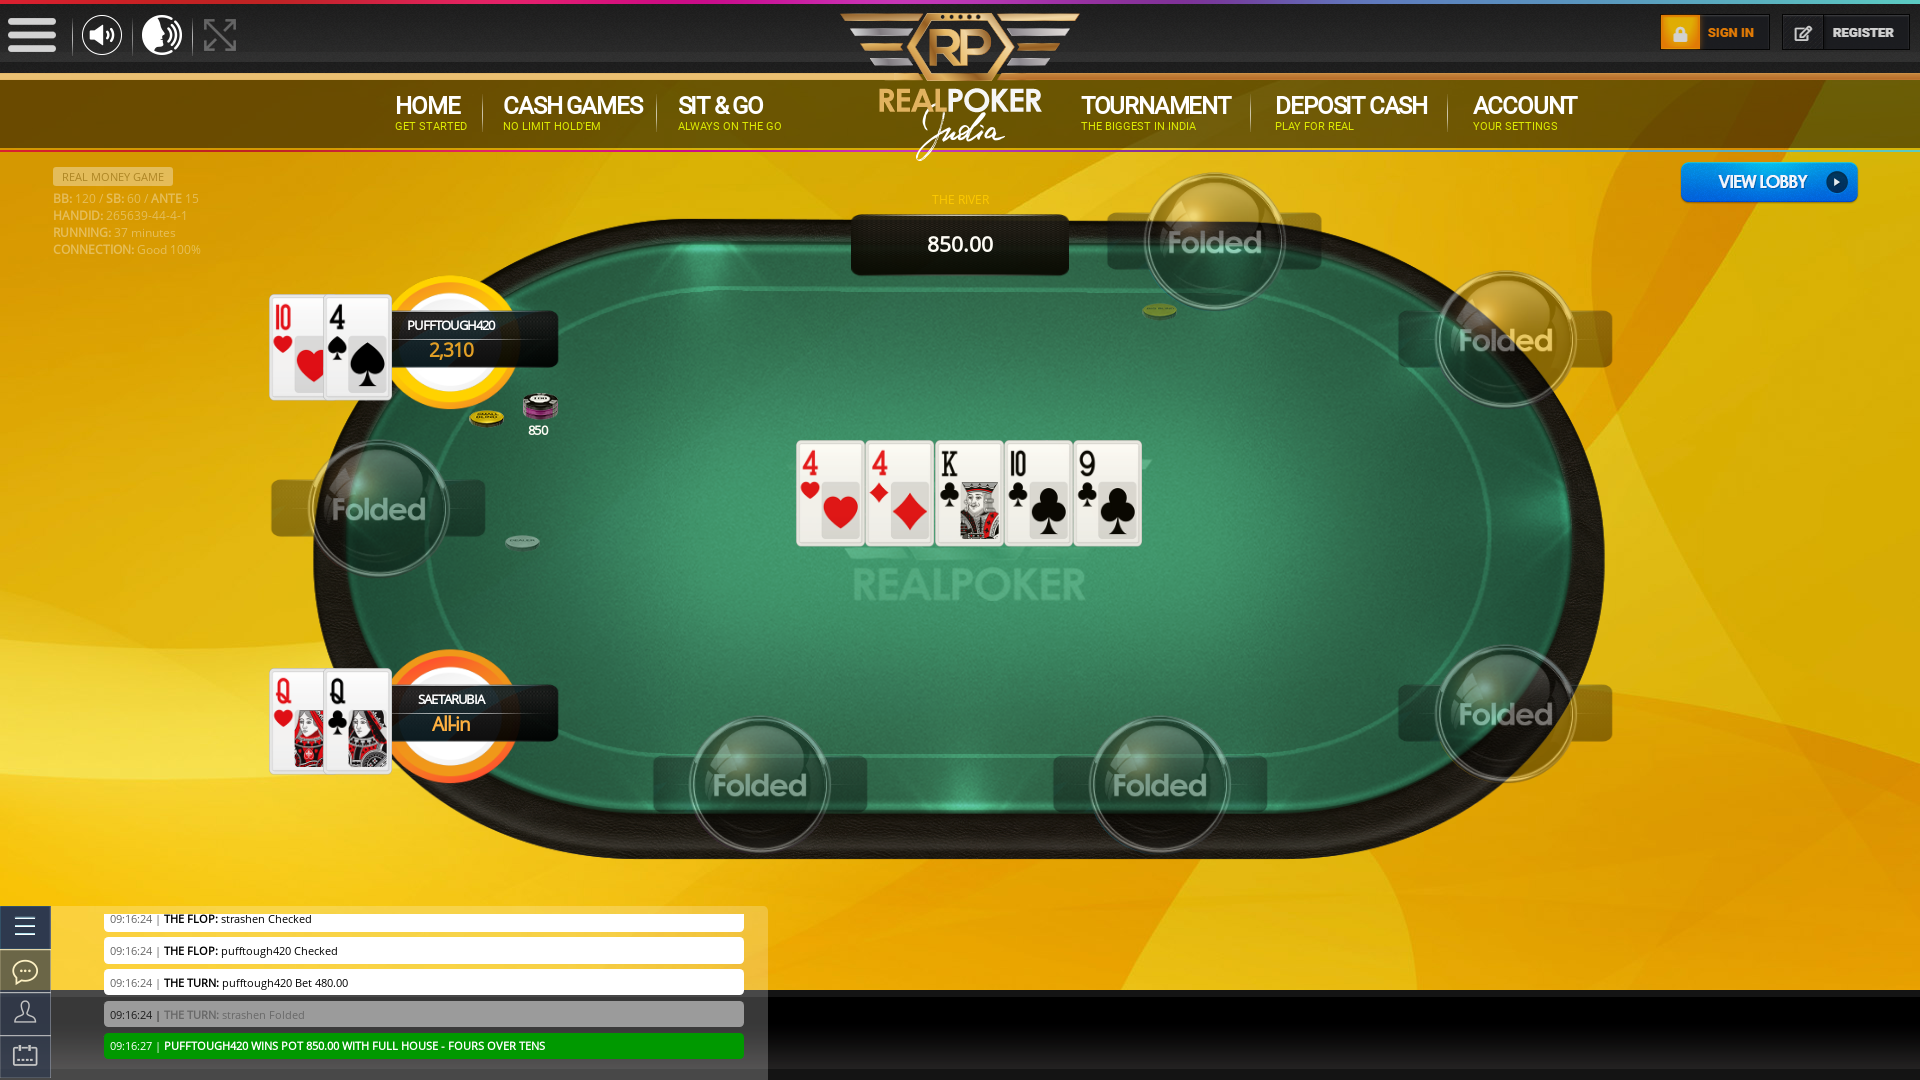 10 player poker in the 37th minute